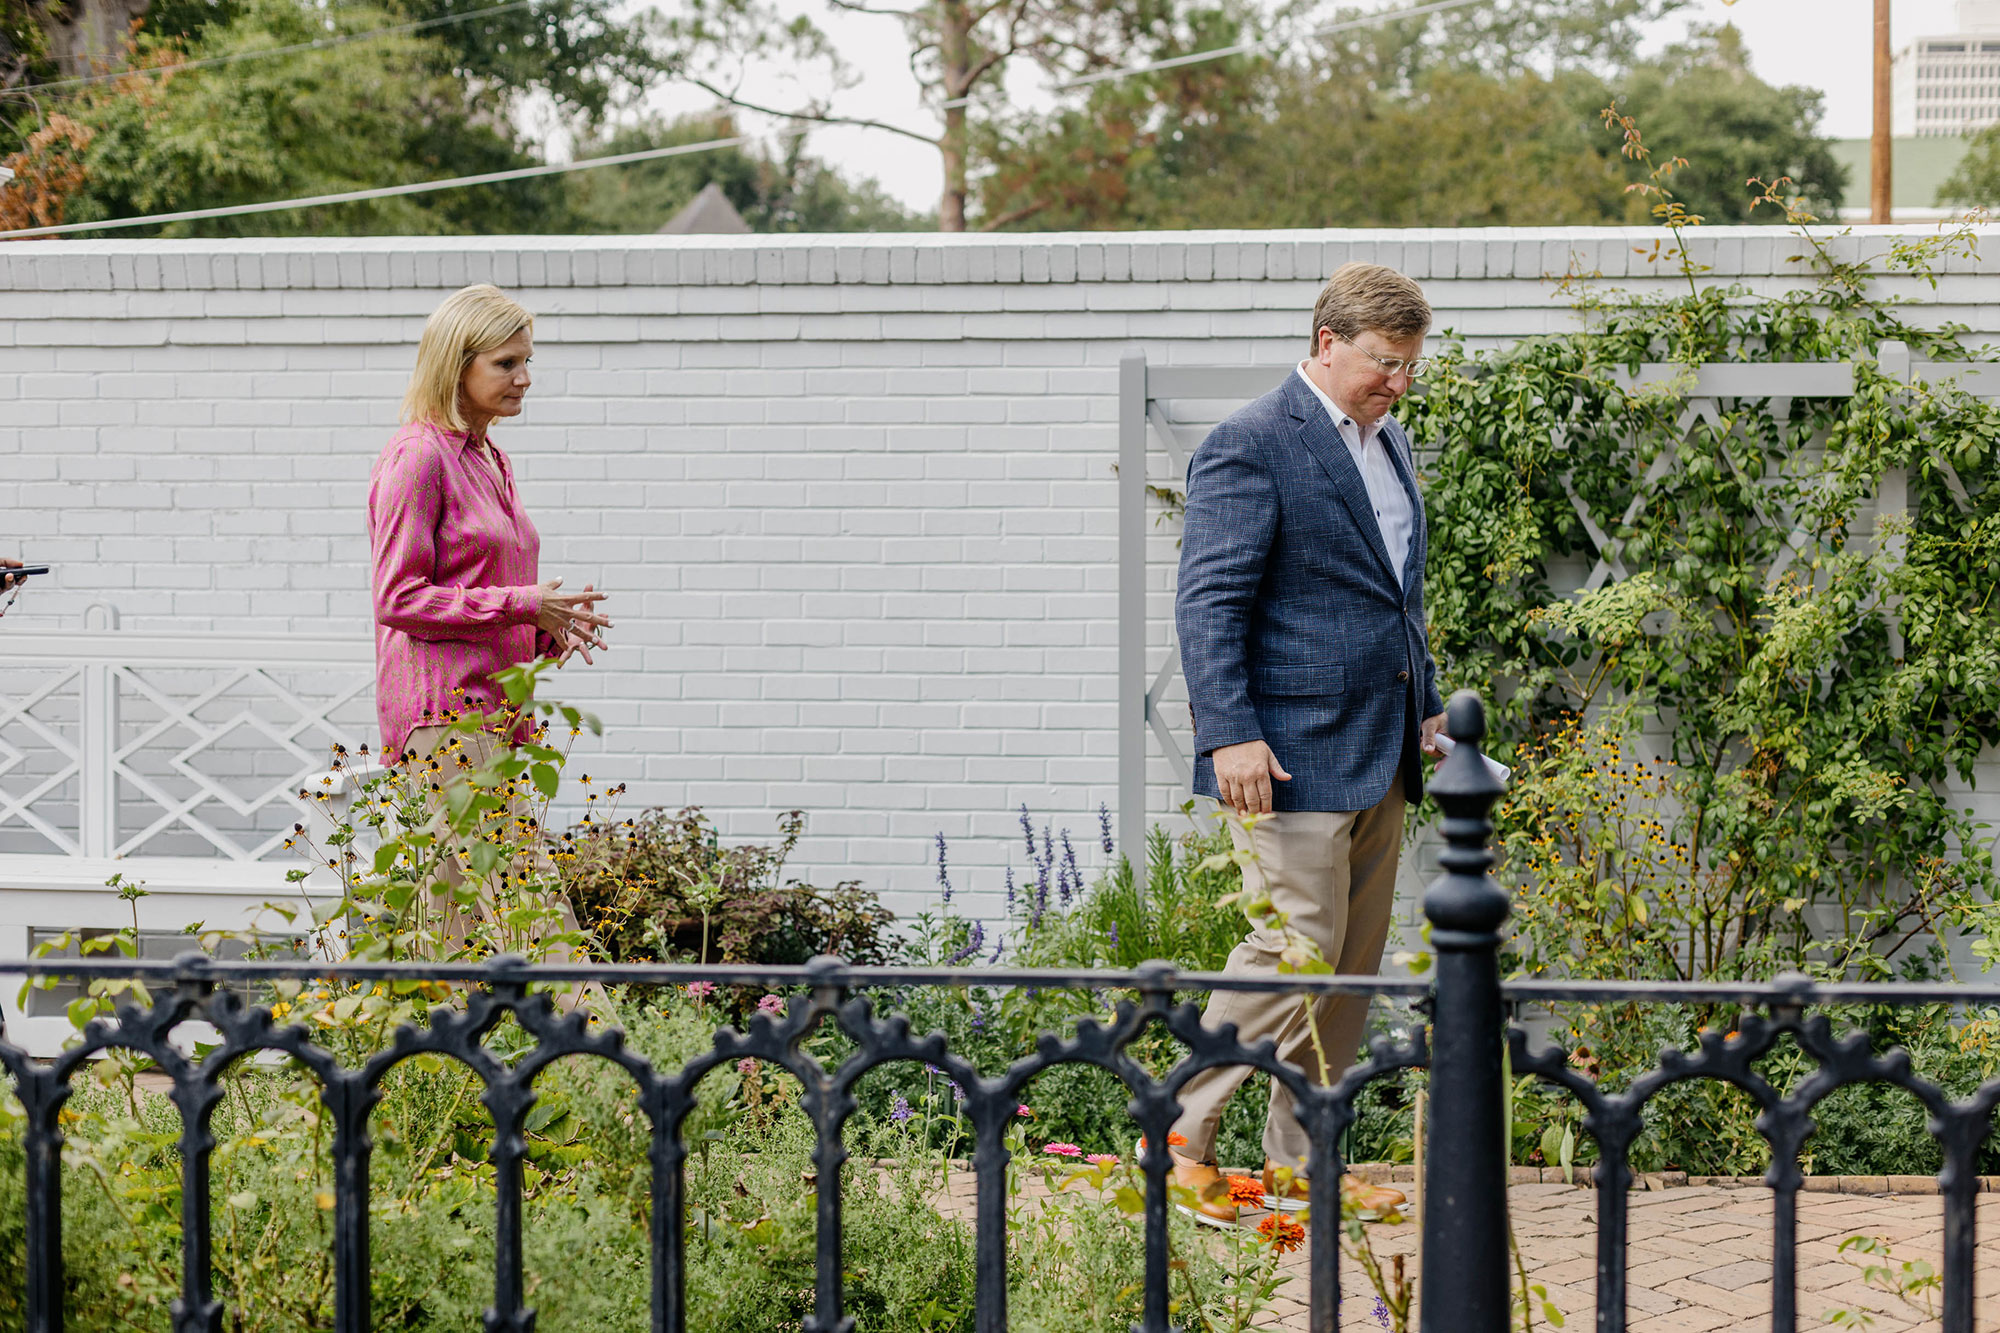 photo shows Tate Reeves and Elee Reeves walking through the garden of the governor's mansion, a white wall behind them